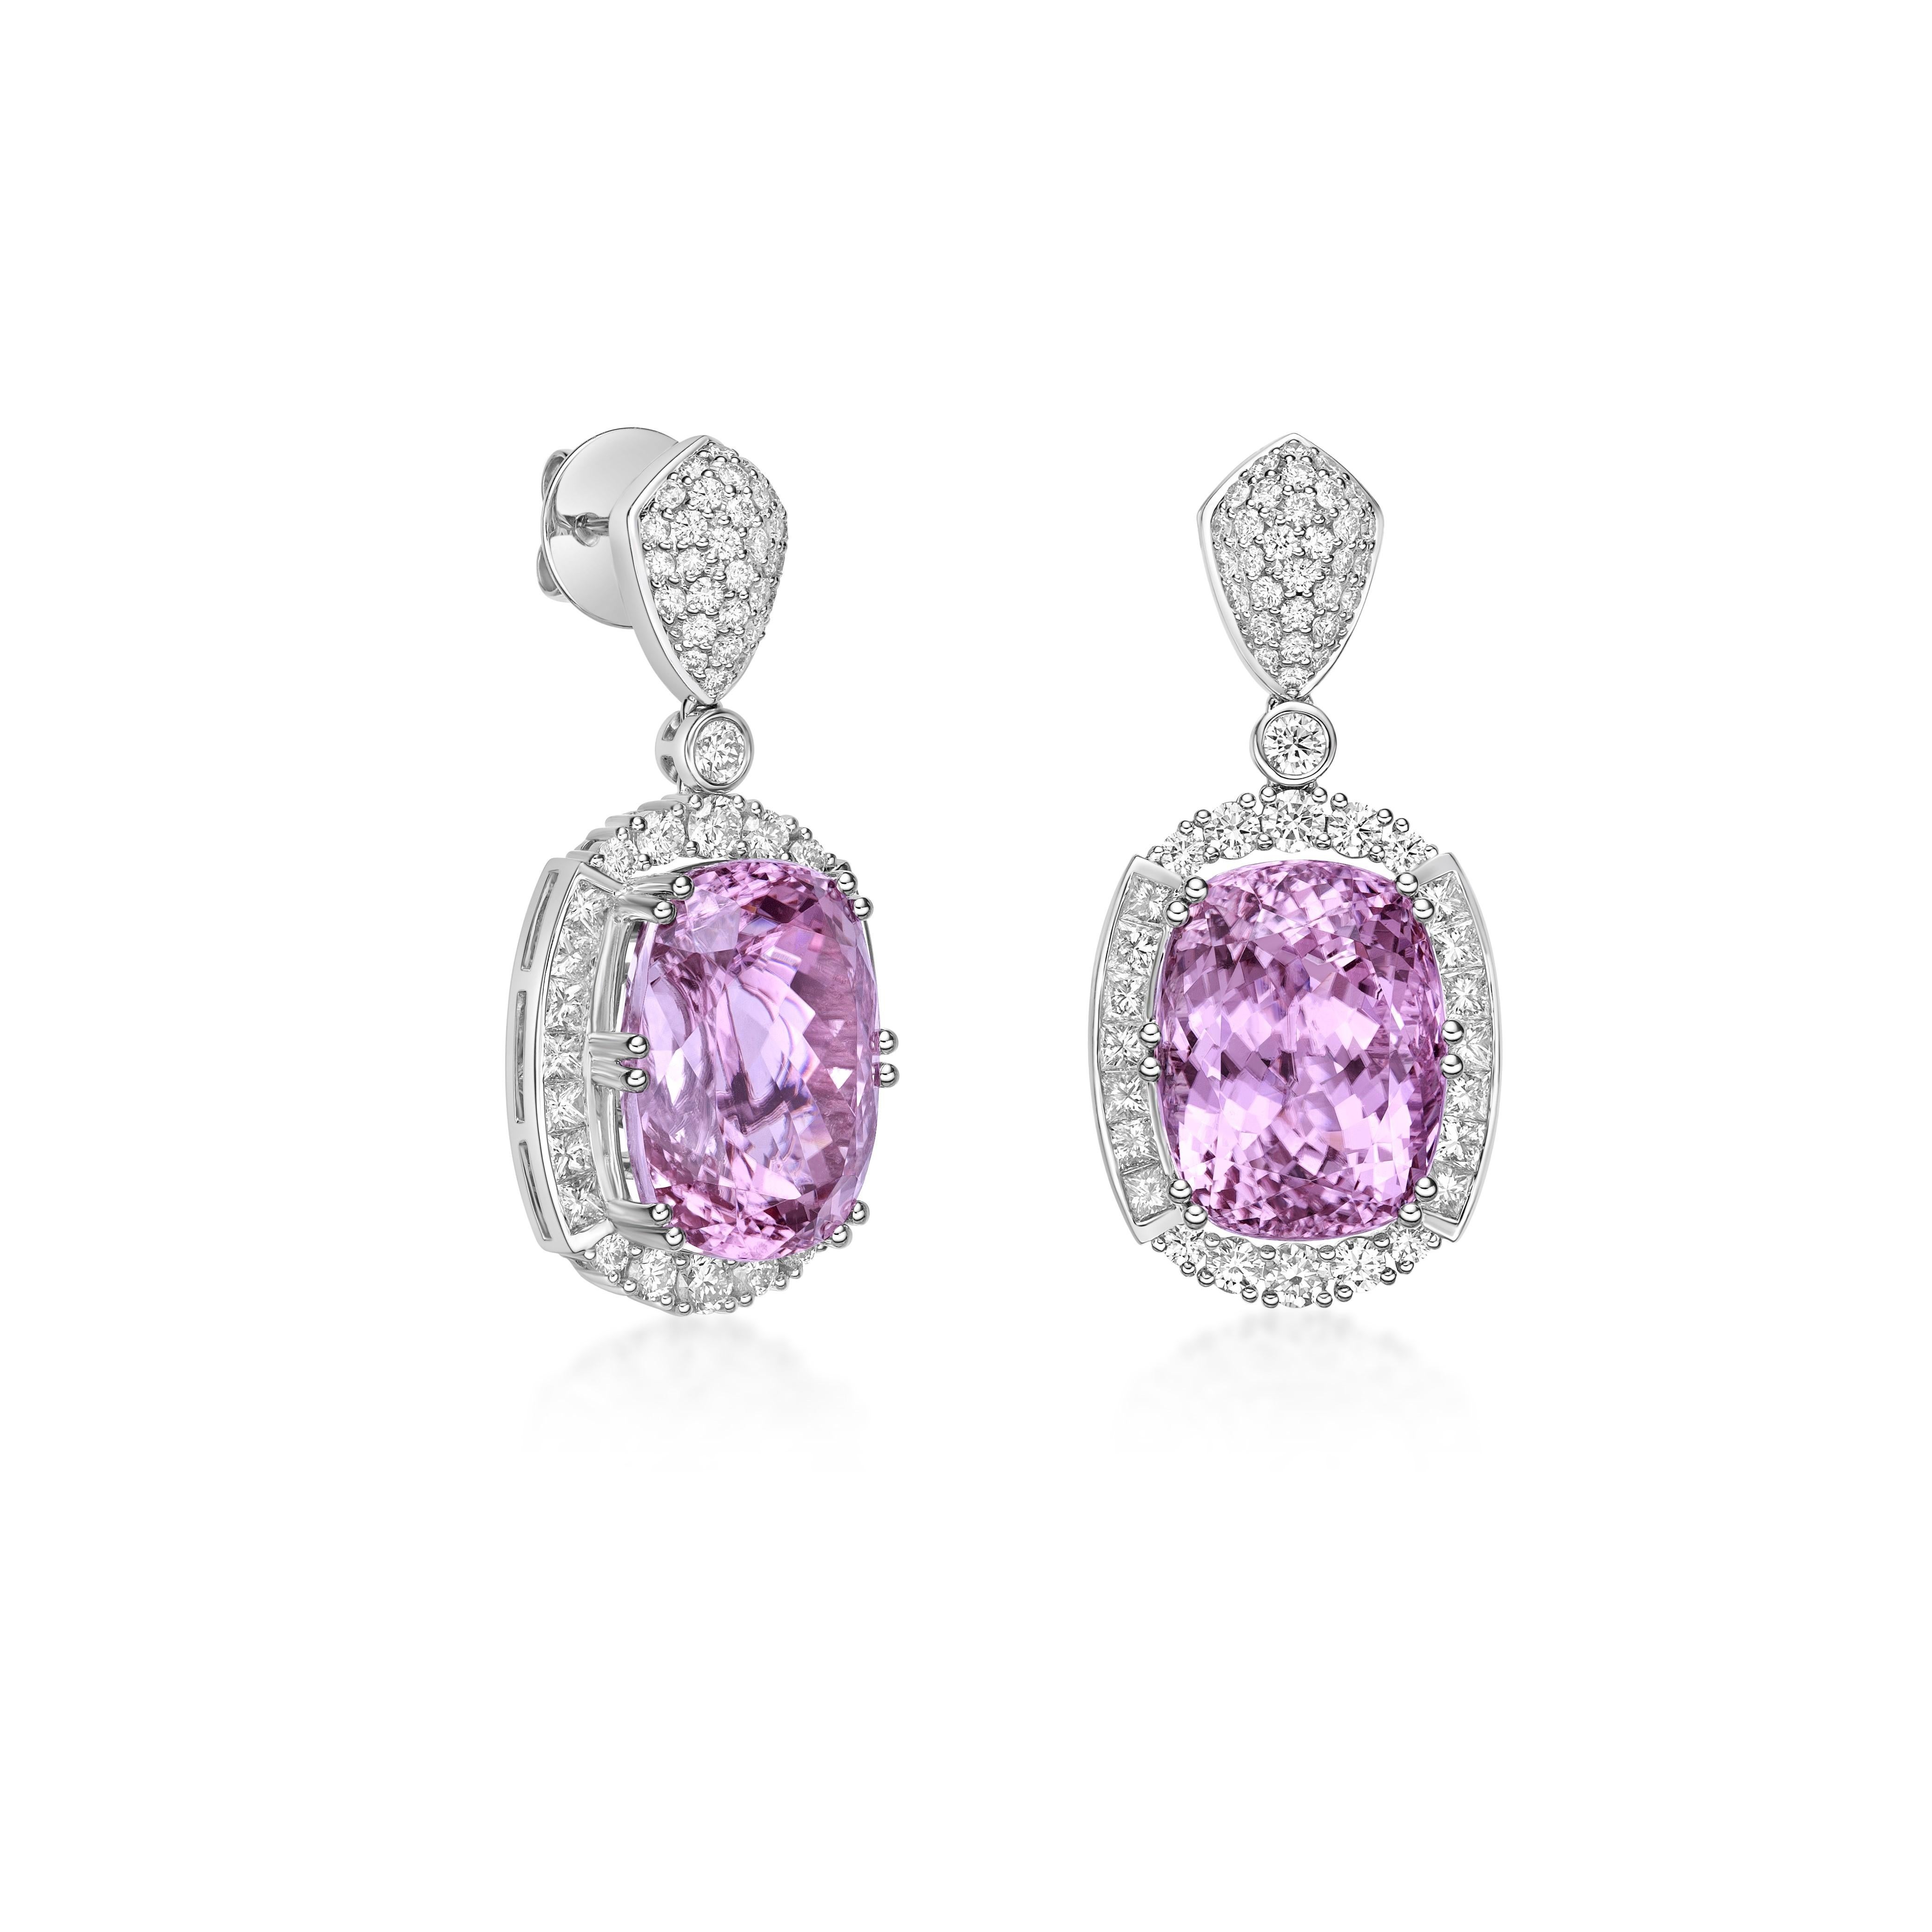 This collection features an array of Pink Tourmaline with a Pink hue that is as cool as it gets! Accented with diamonds these earrings are made in white gold and present a classic yet elegant look.

Pink Tourmaline Drop Earrings in 18 Karat White